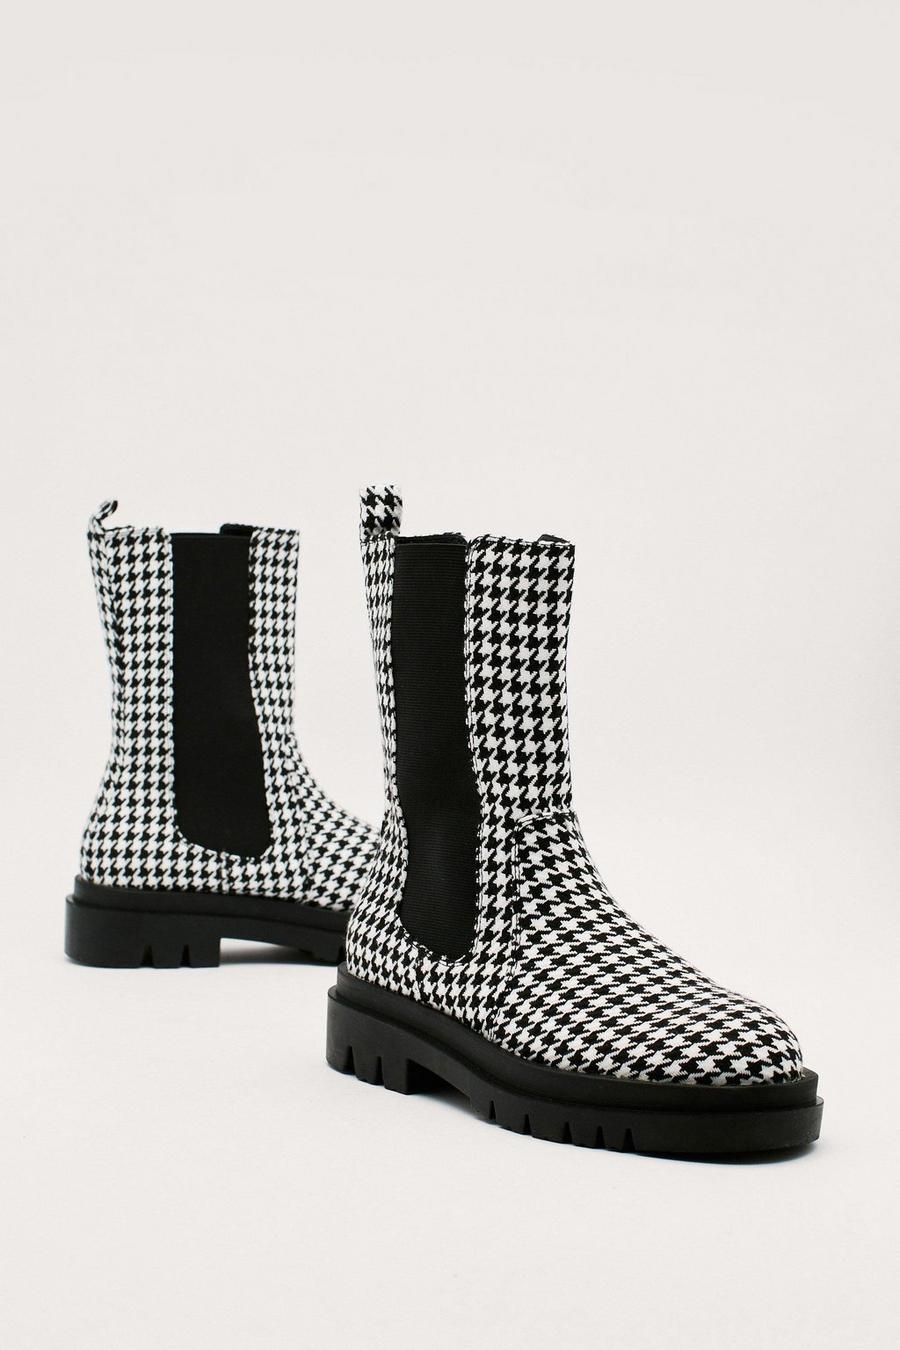 Black_white Houndstooth Chunky High Ankle Chelsea Boots